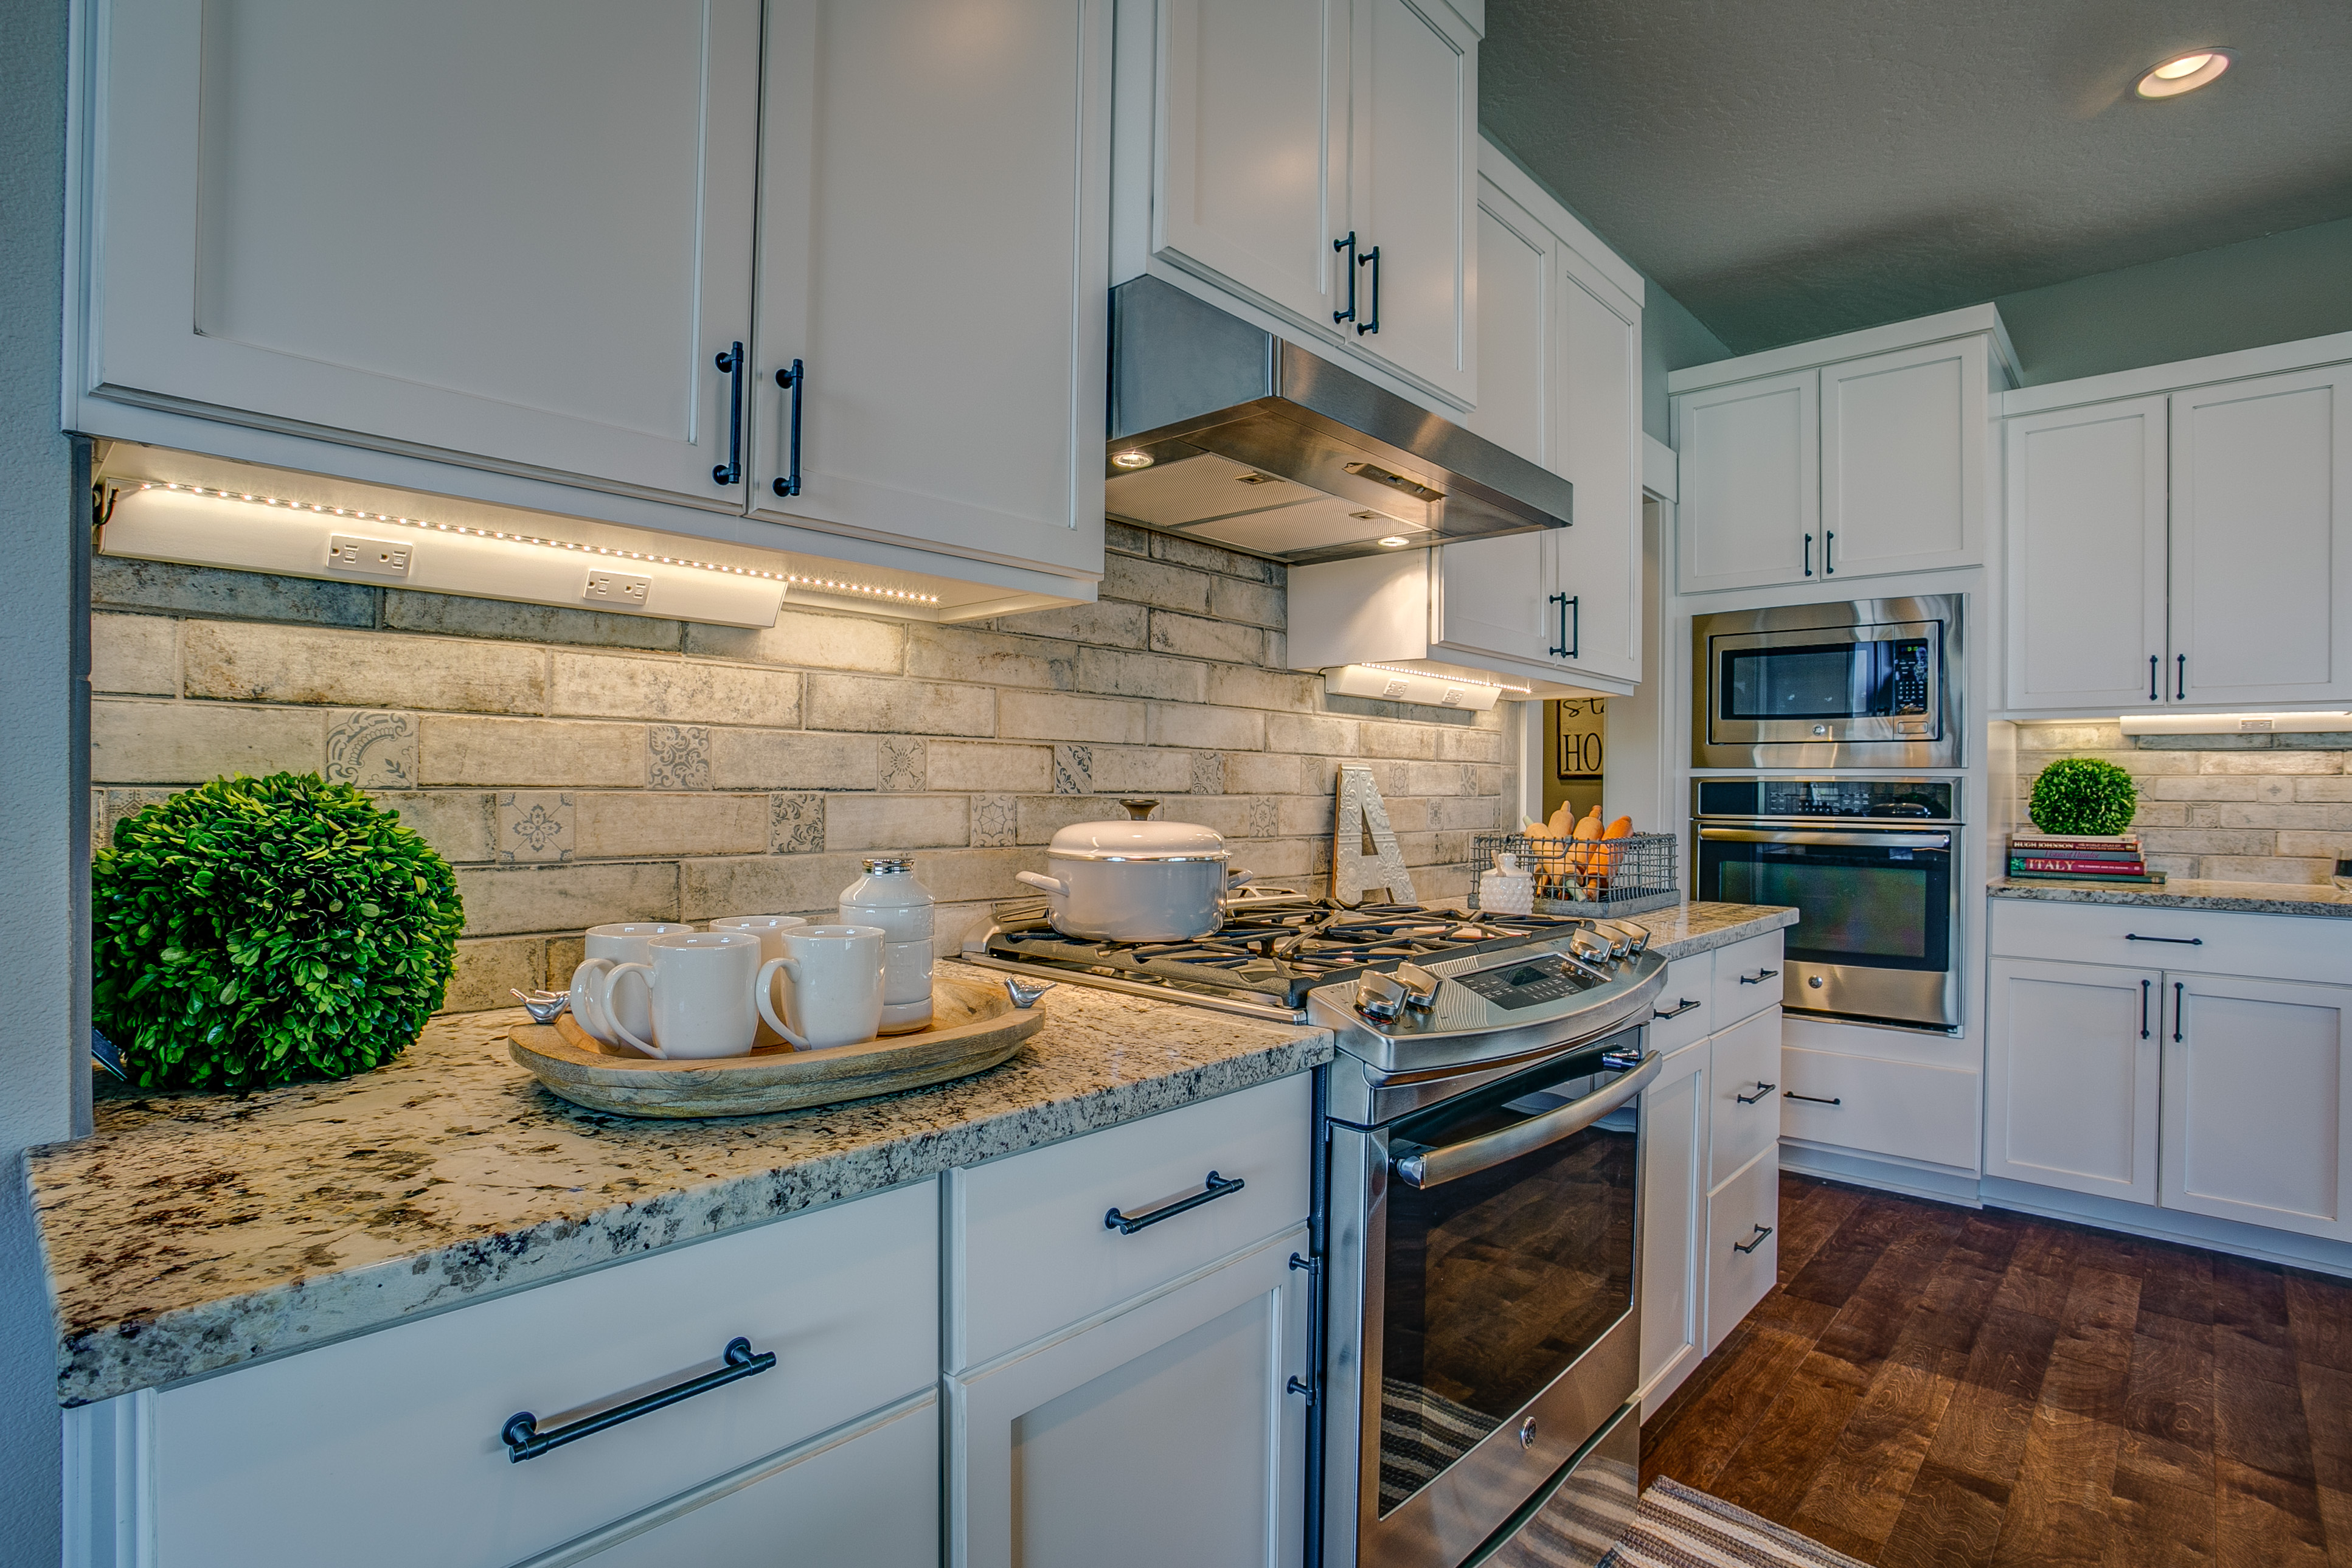 Kitchen backsplash with granite counters and white cabinets.